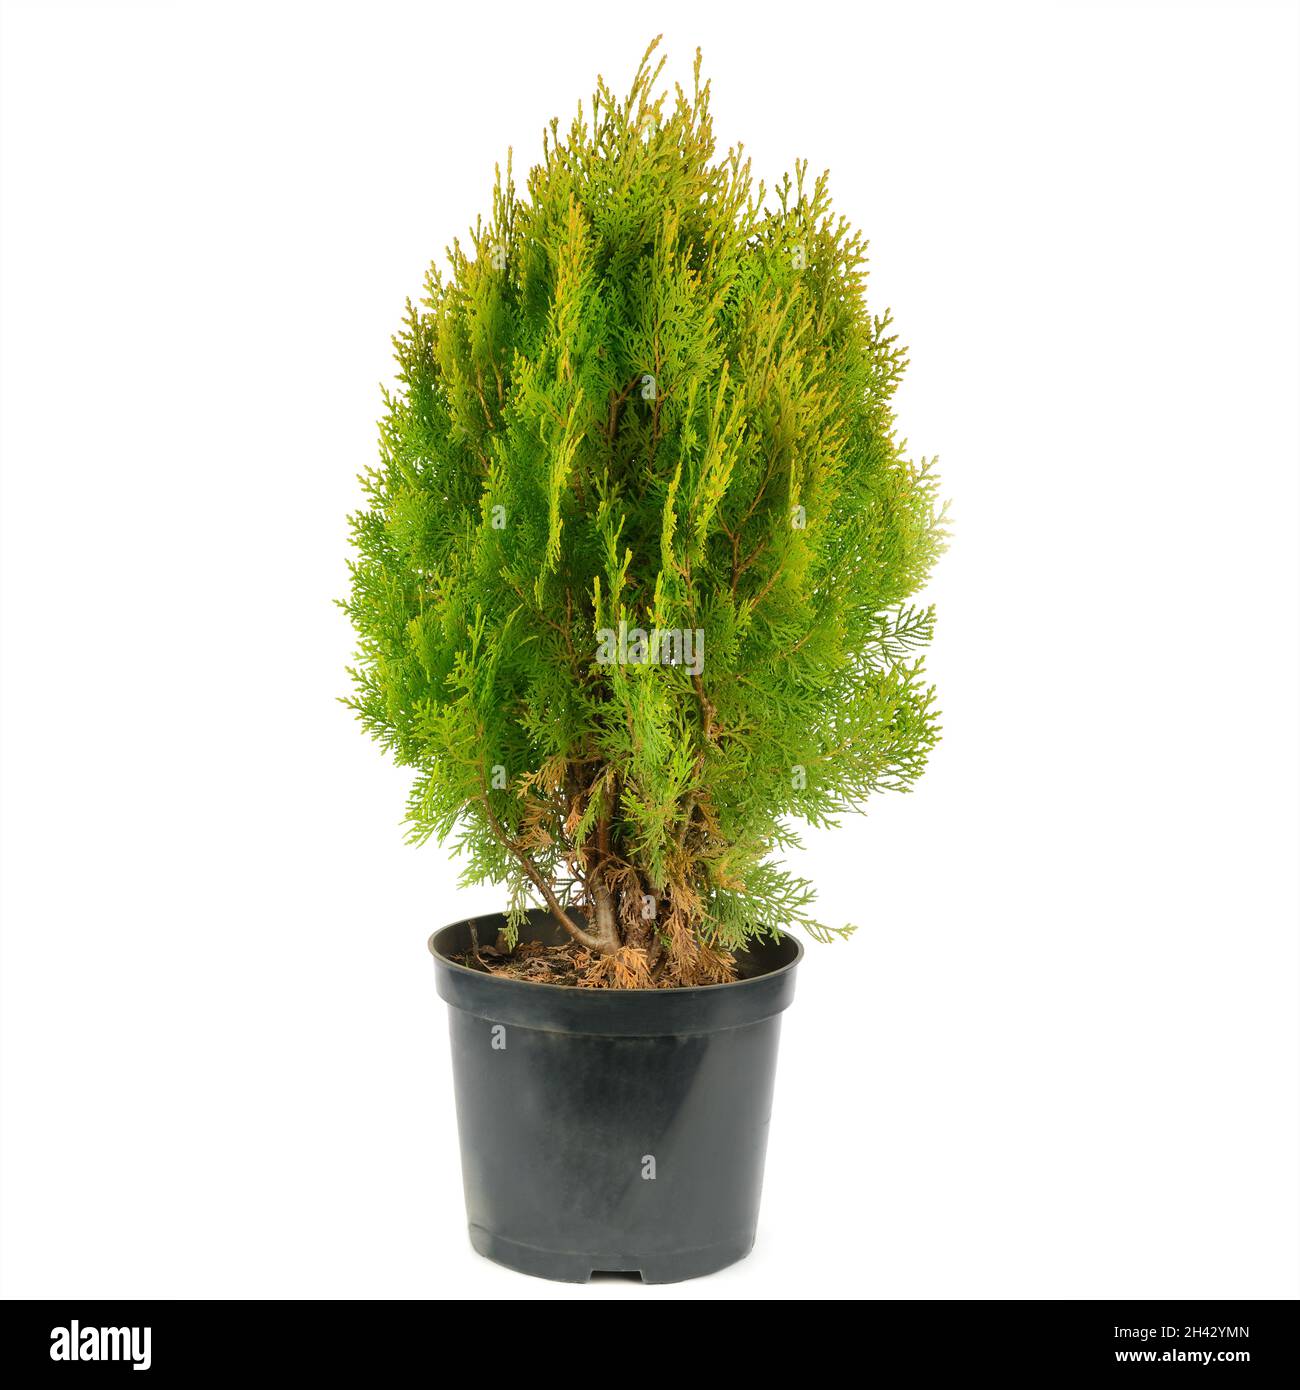 Thuja garden bush in a pot isolated on white background Stock Photo